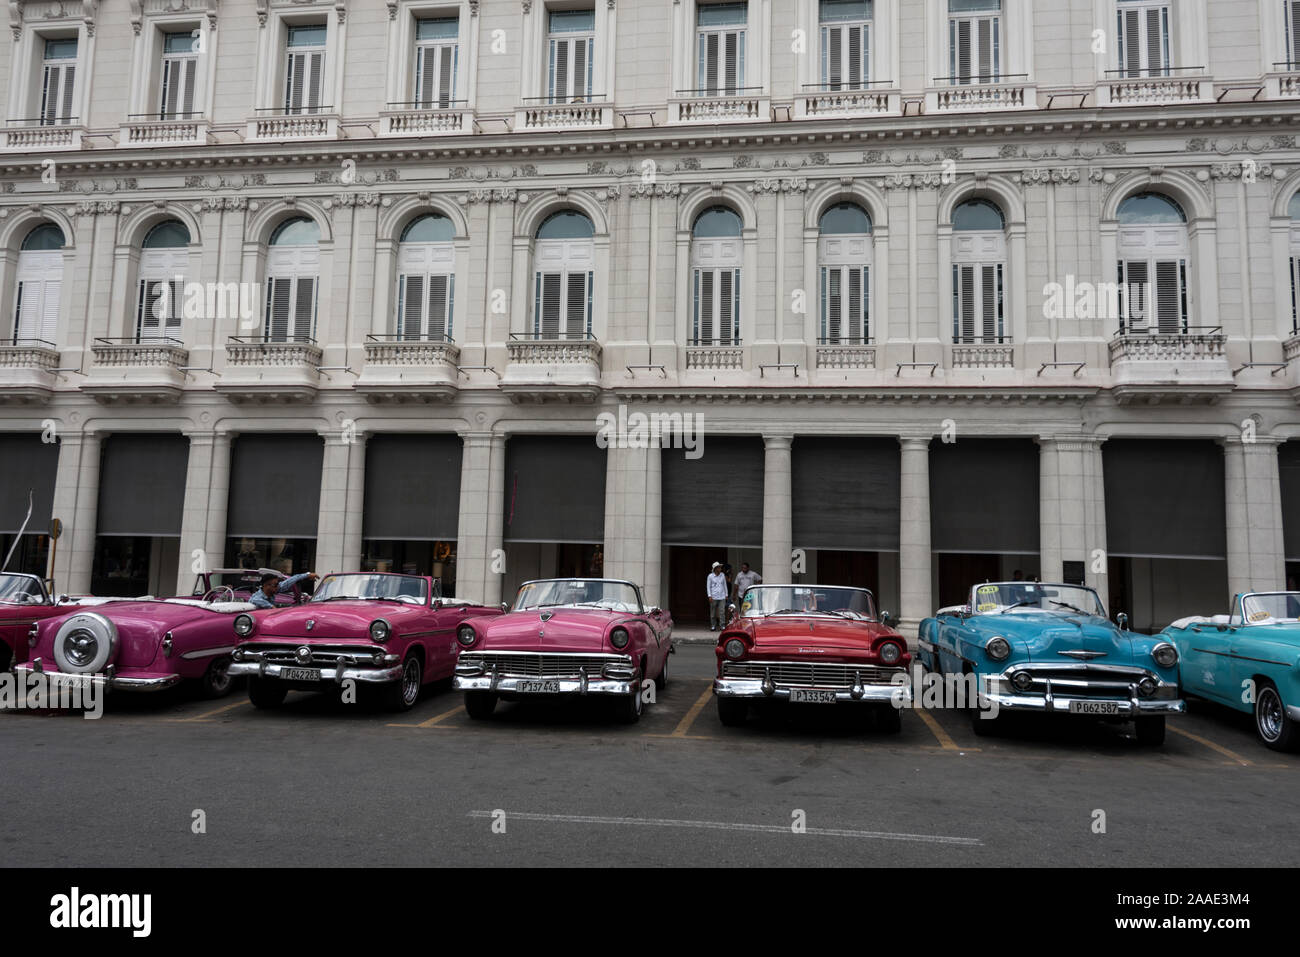 Many of the eye-catching convertible classic American car taxis (taxis particulares) seen in and around the streets of Havana in Cuba are very popularr Stock Photo